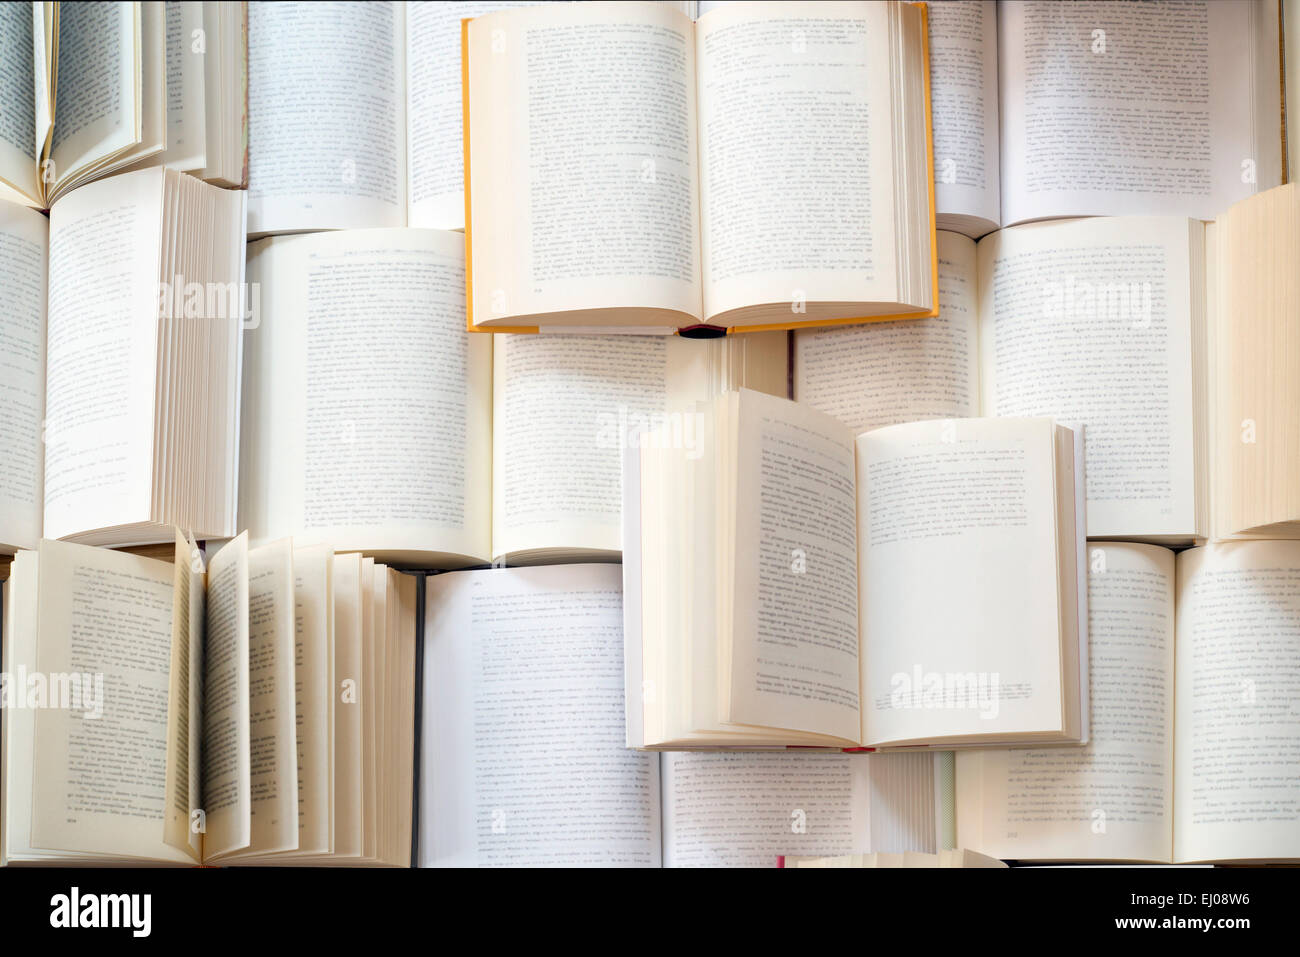 Many open books piled up. unreadable text Stock Photo